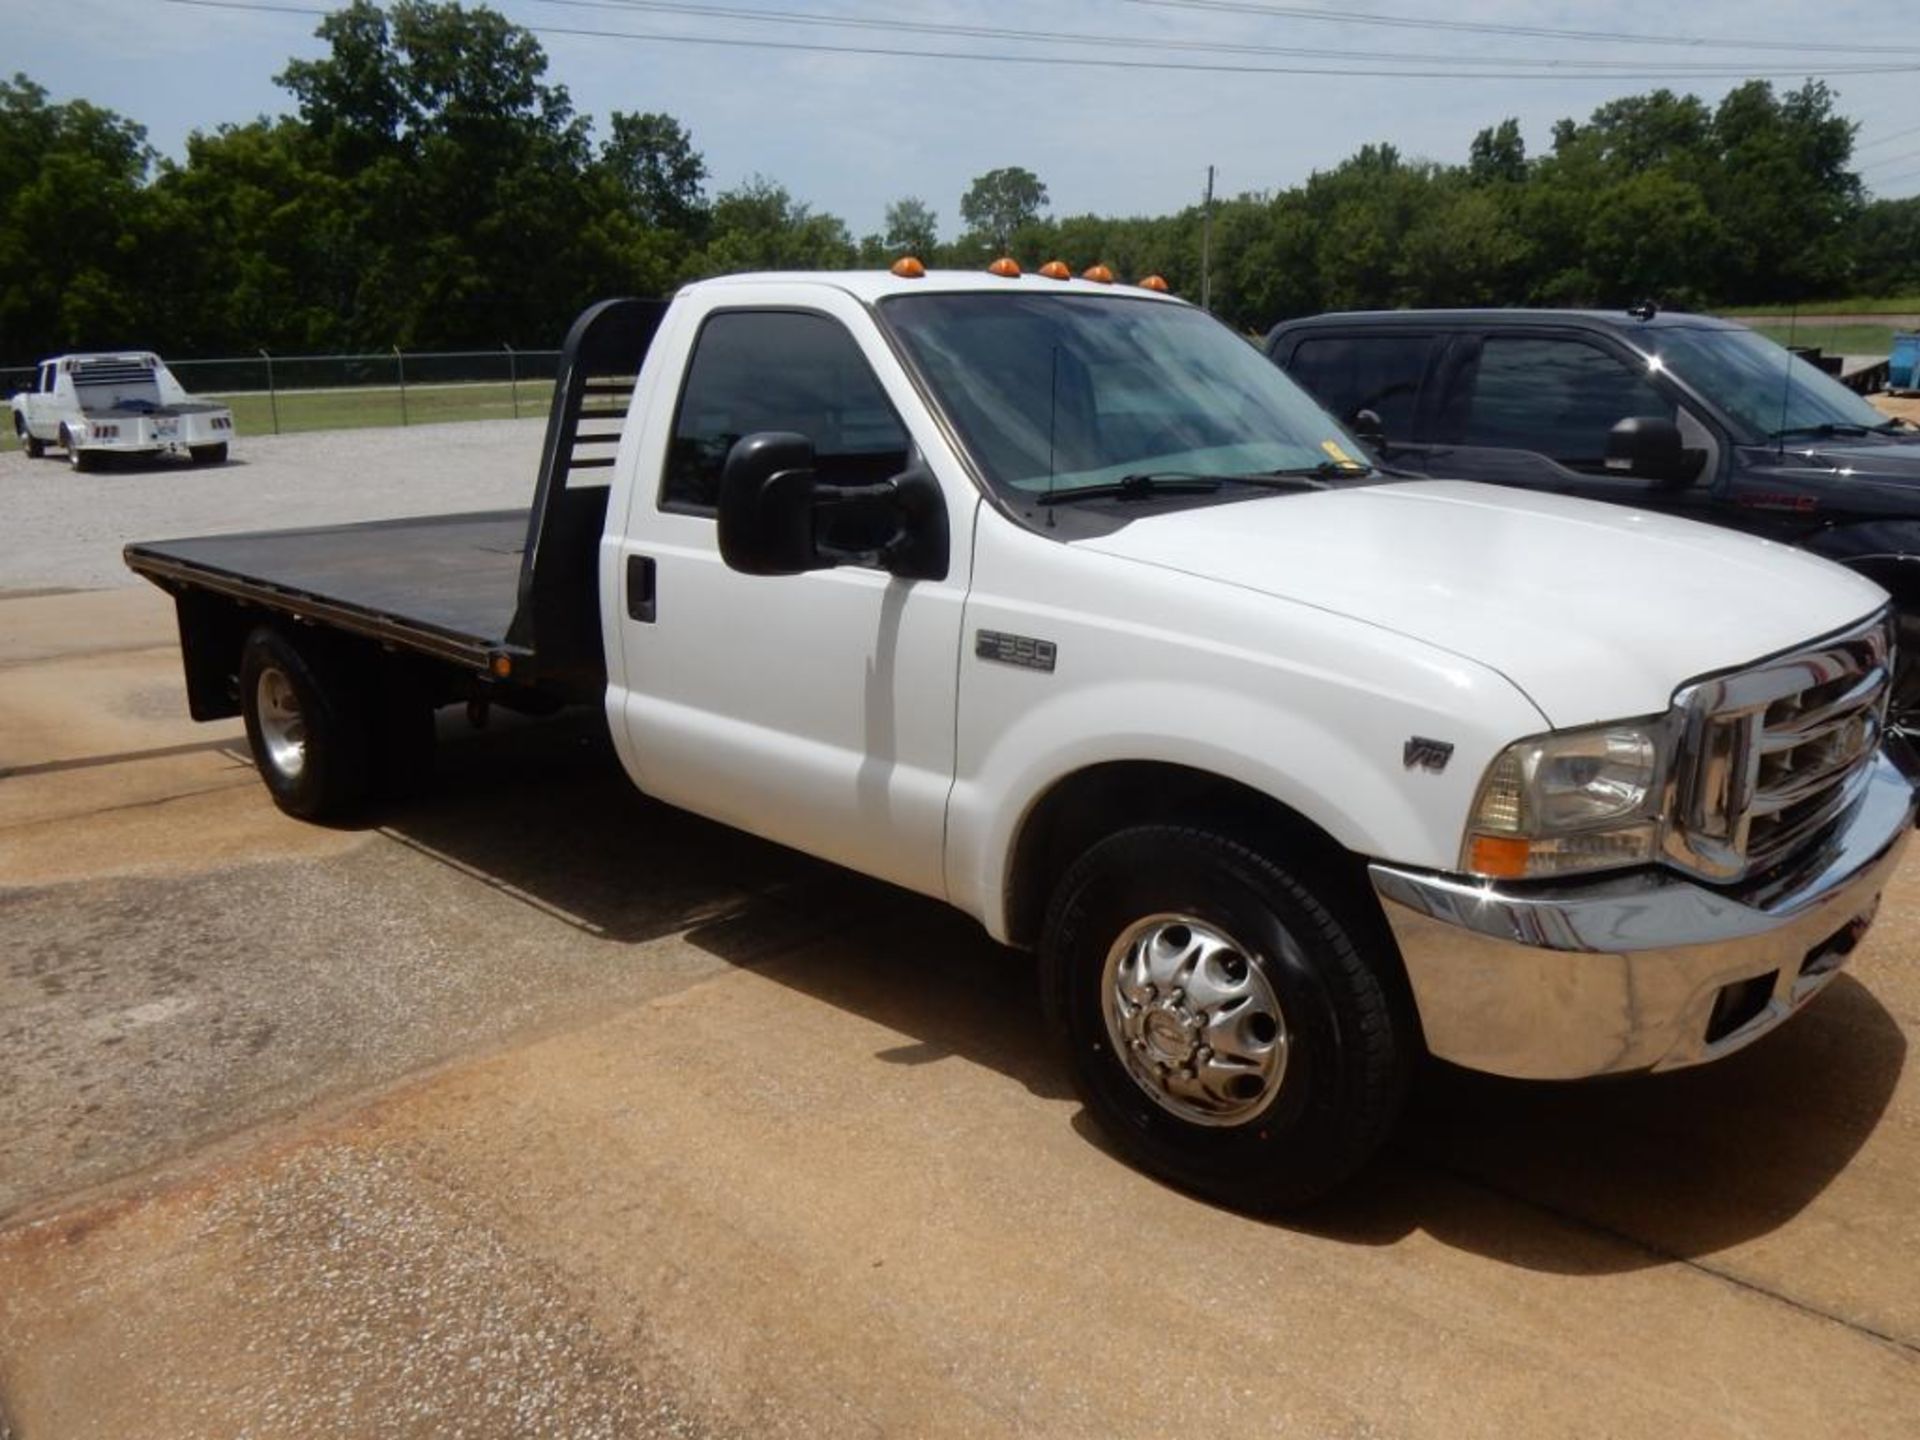 1999 FORD F350 1-TON FLATBED, VIN# 3FDWF36SXXMA38244, 207,550 MILES